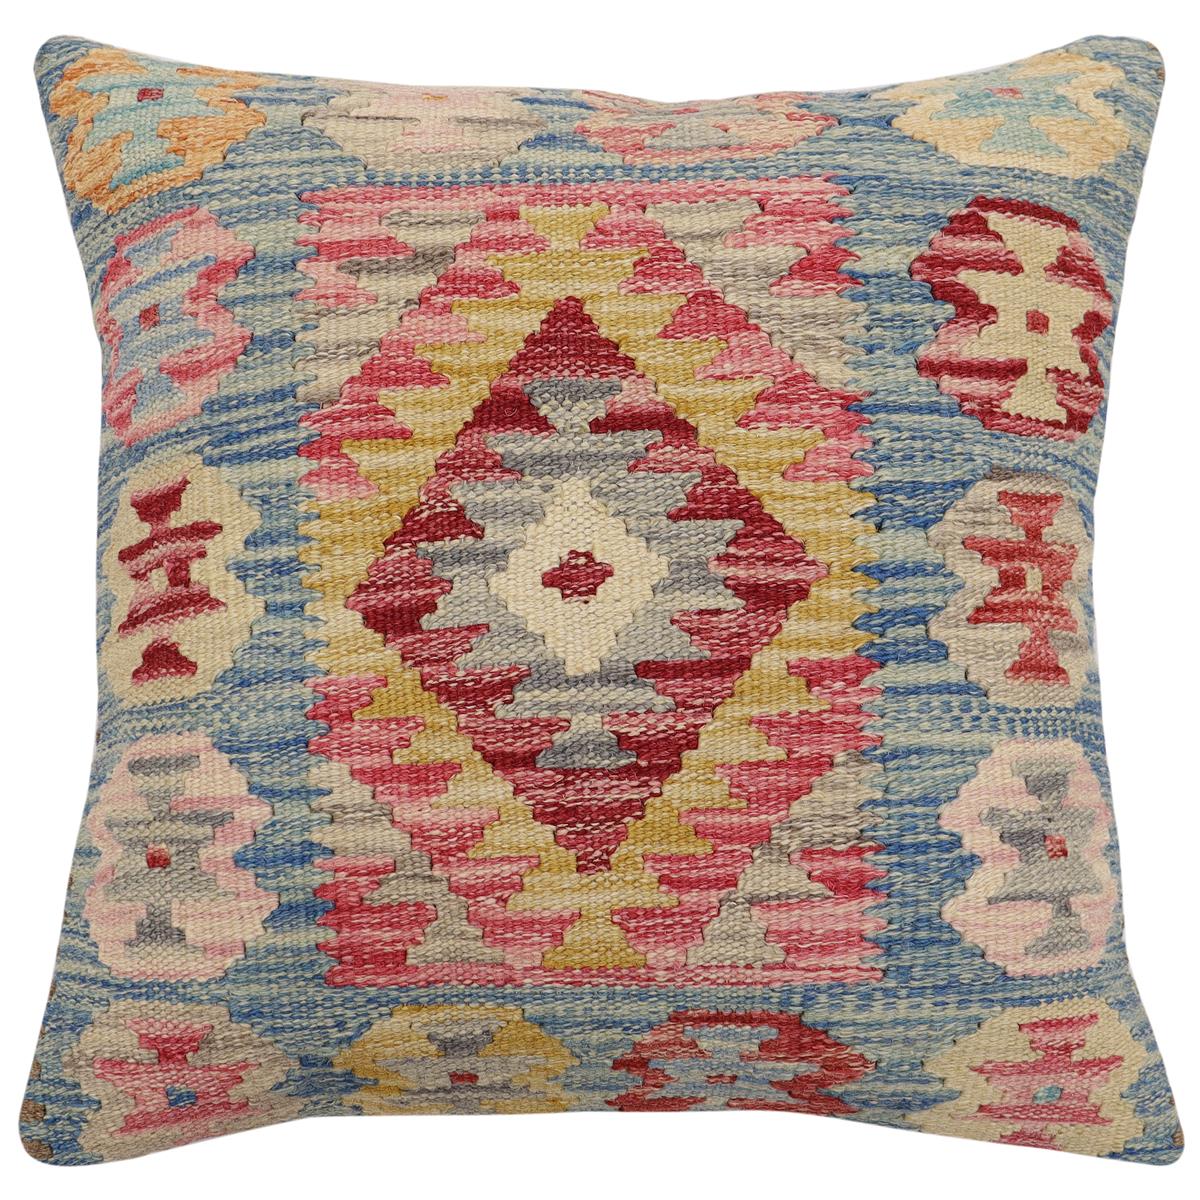 handmade Traditional Pillow Blue Gold Hand-Woven SQUARE 100% WOOL Hand woven turkish pillow2' x 2'